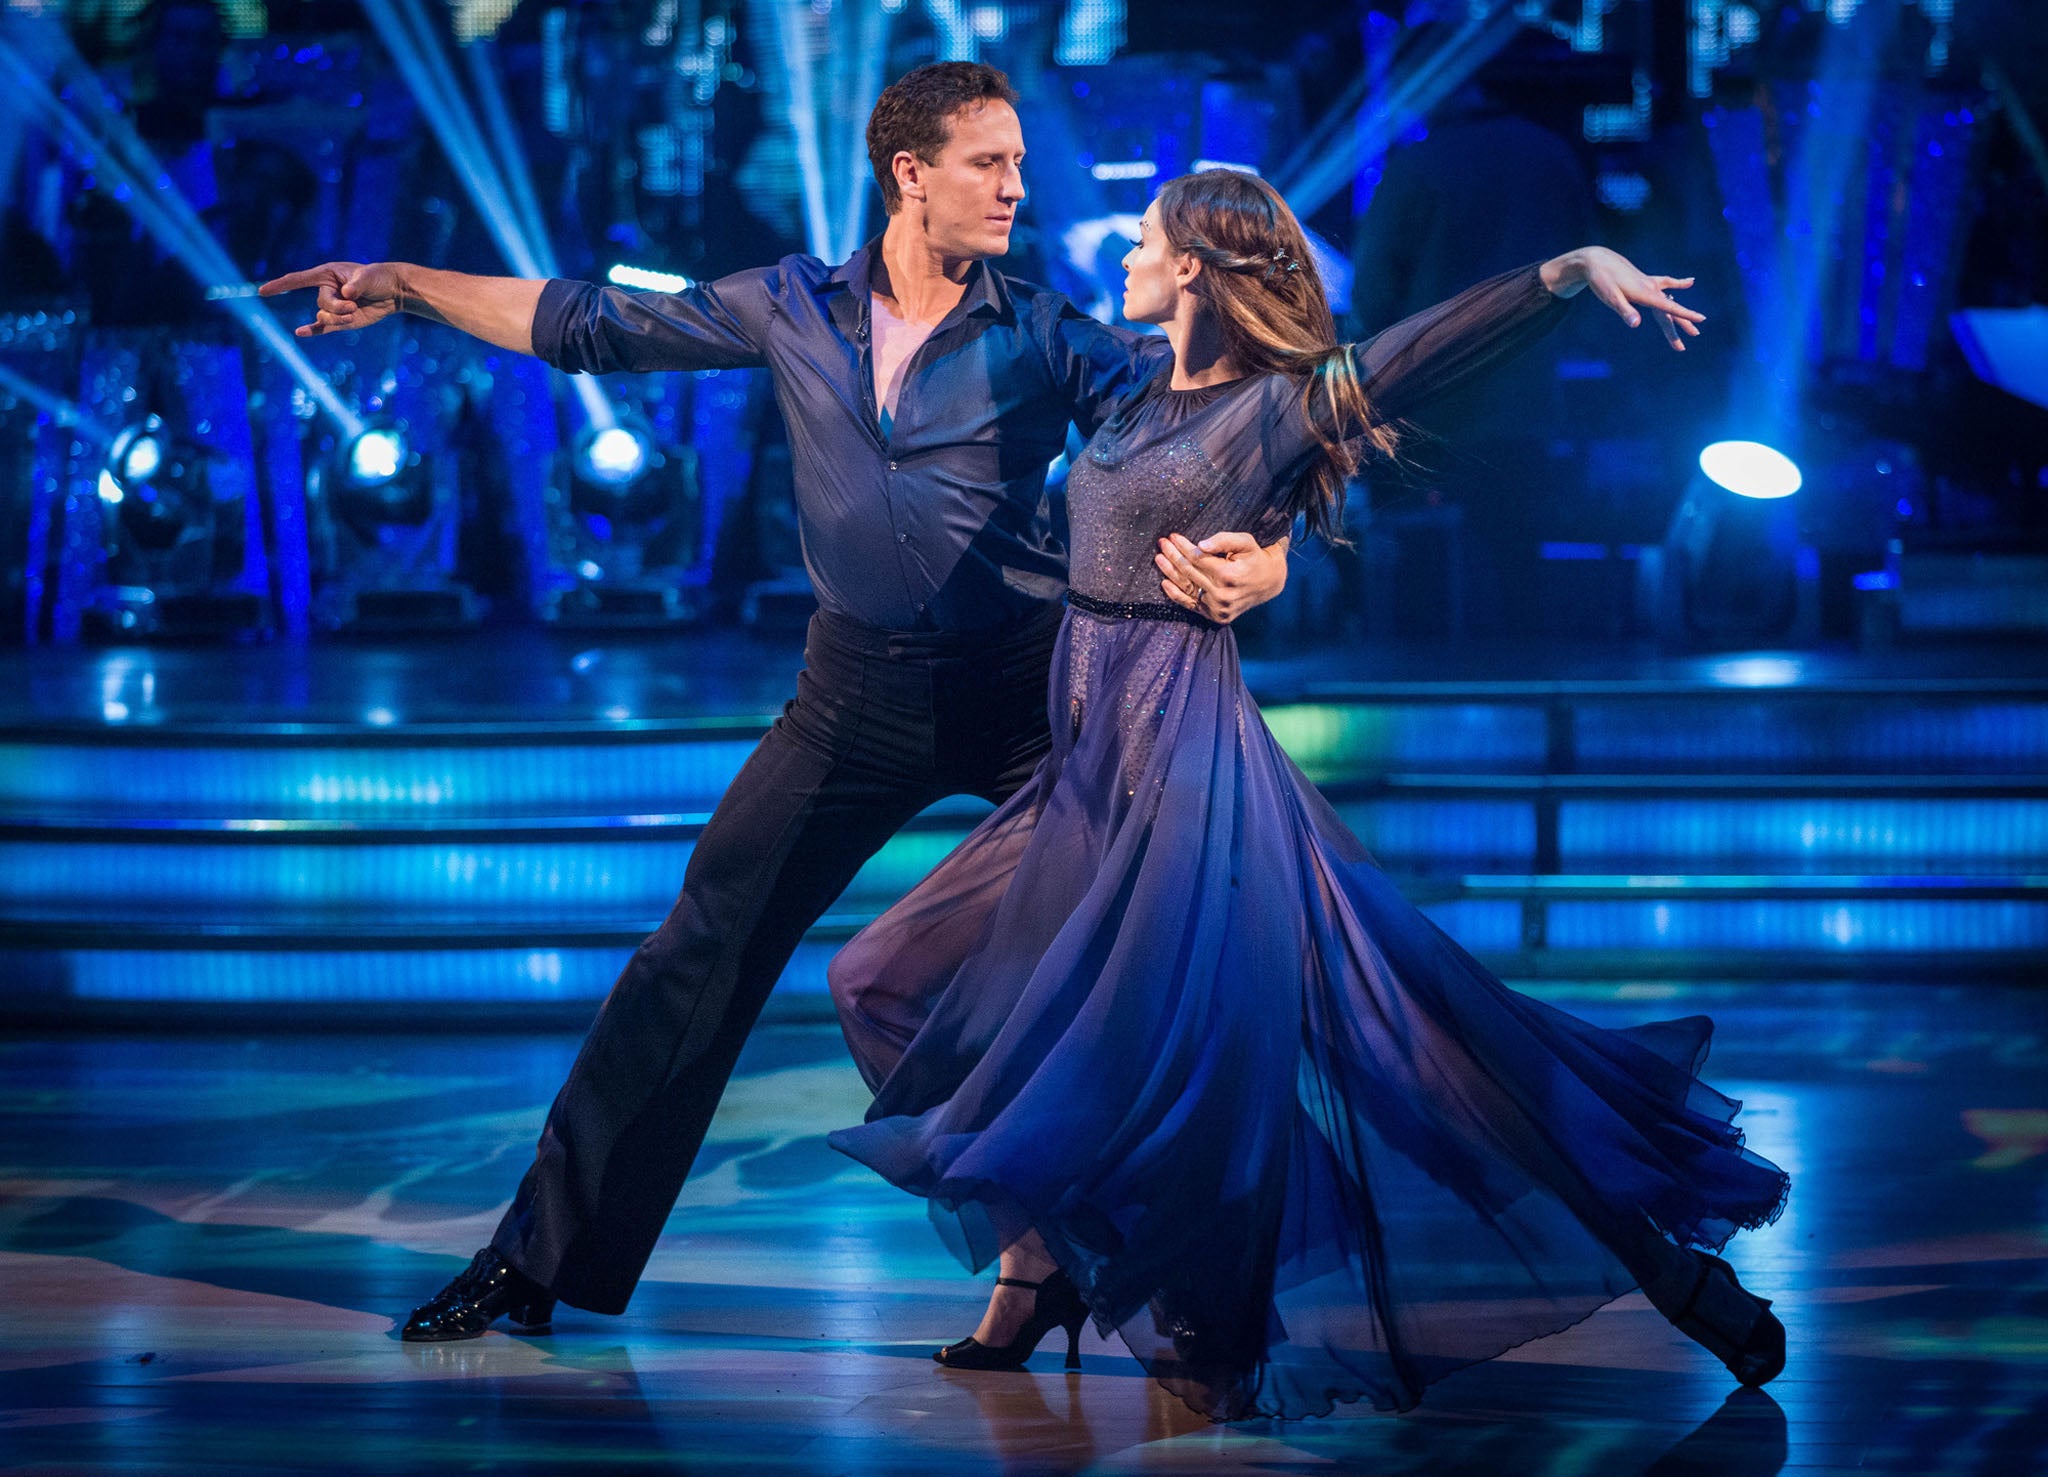 Sophie Ellis Bextor dances the rumba on Strictly Come Dancing 2013